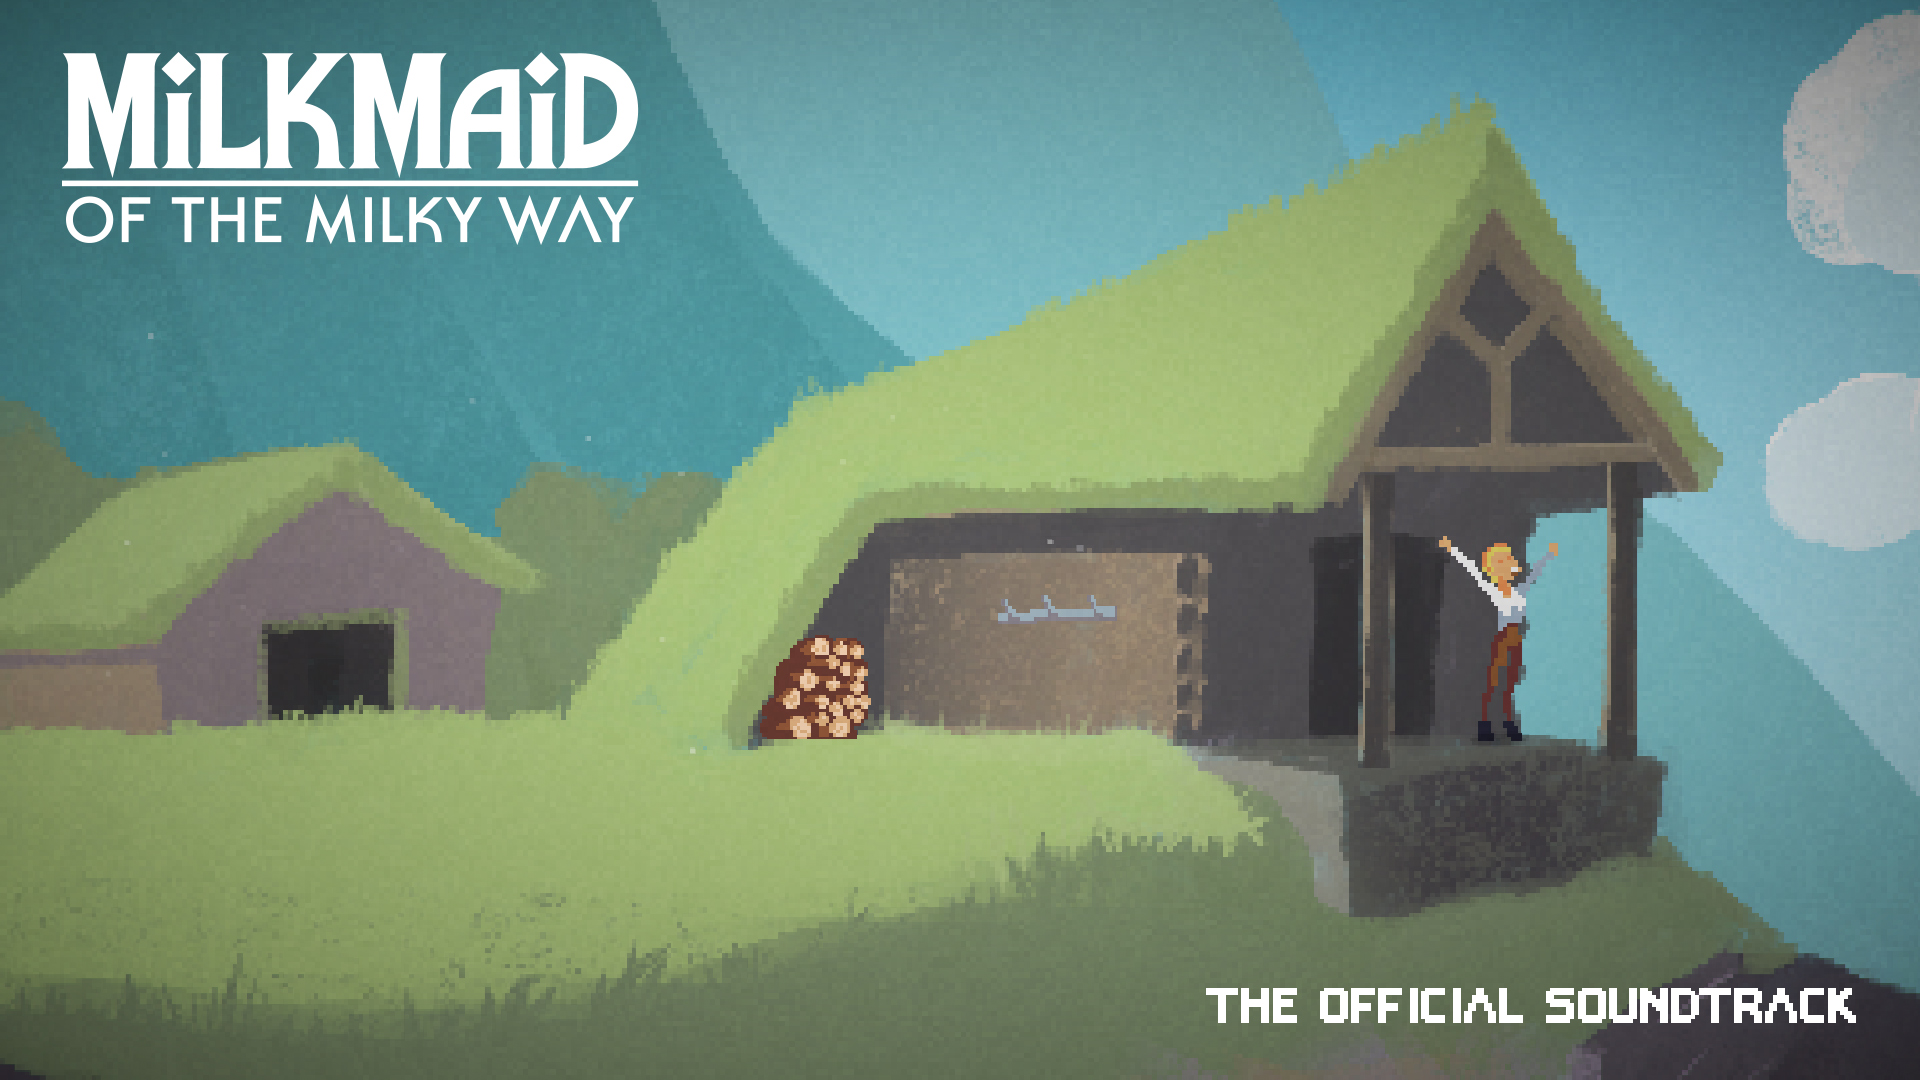 Milkmaid of the Milky Way - Soundtrack Featured Screenshot #1